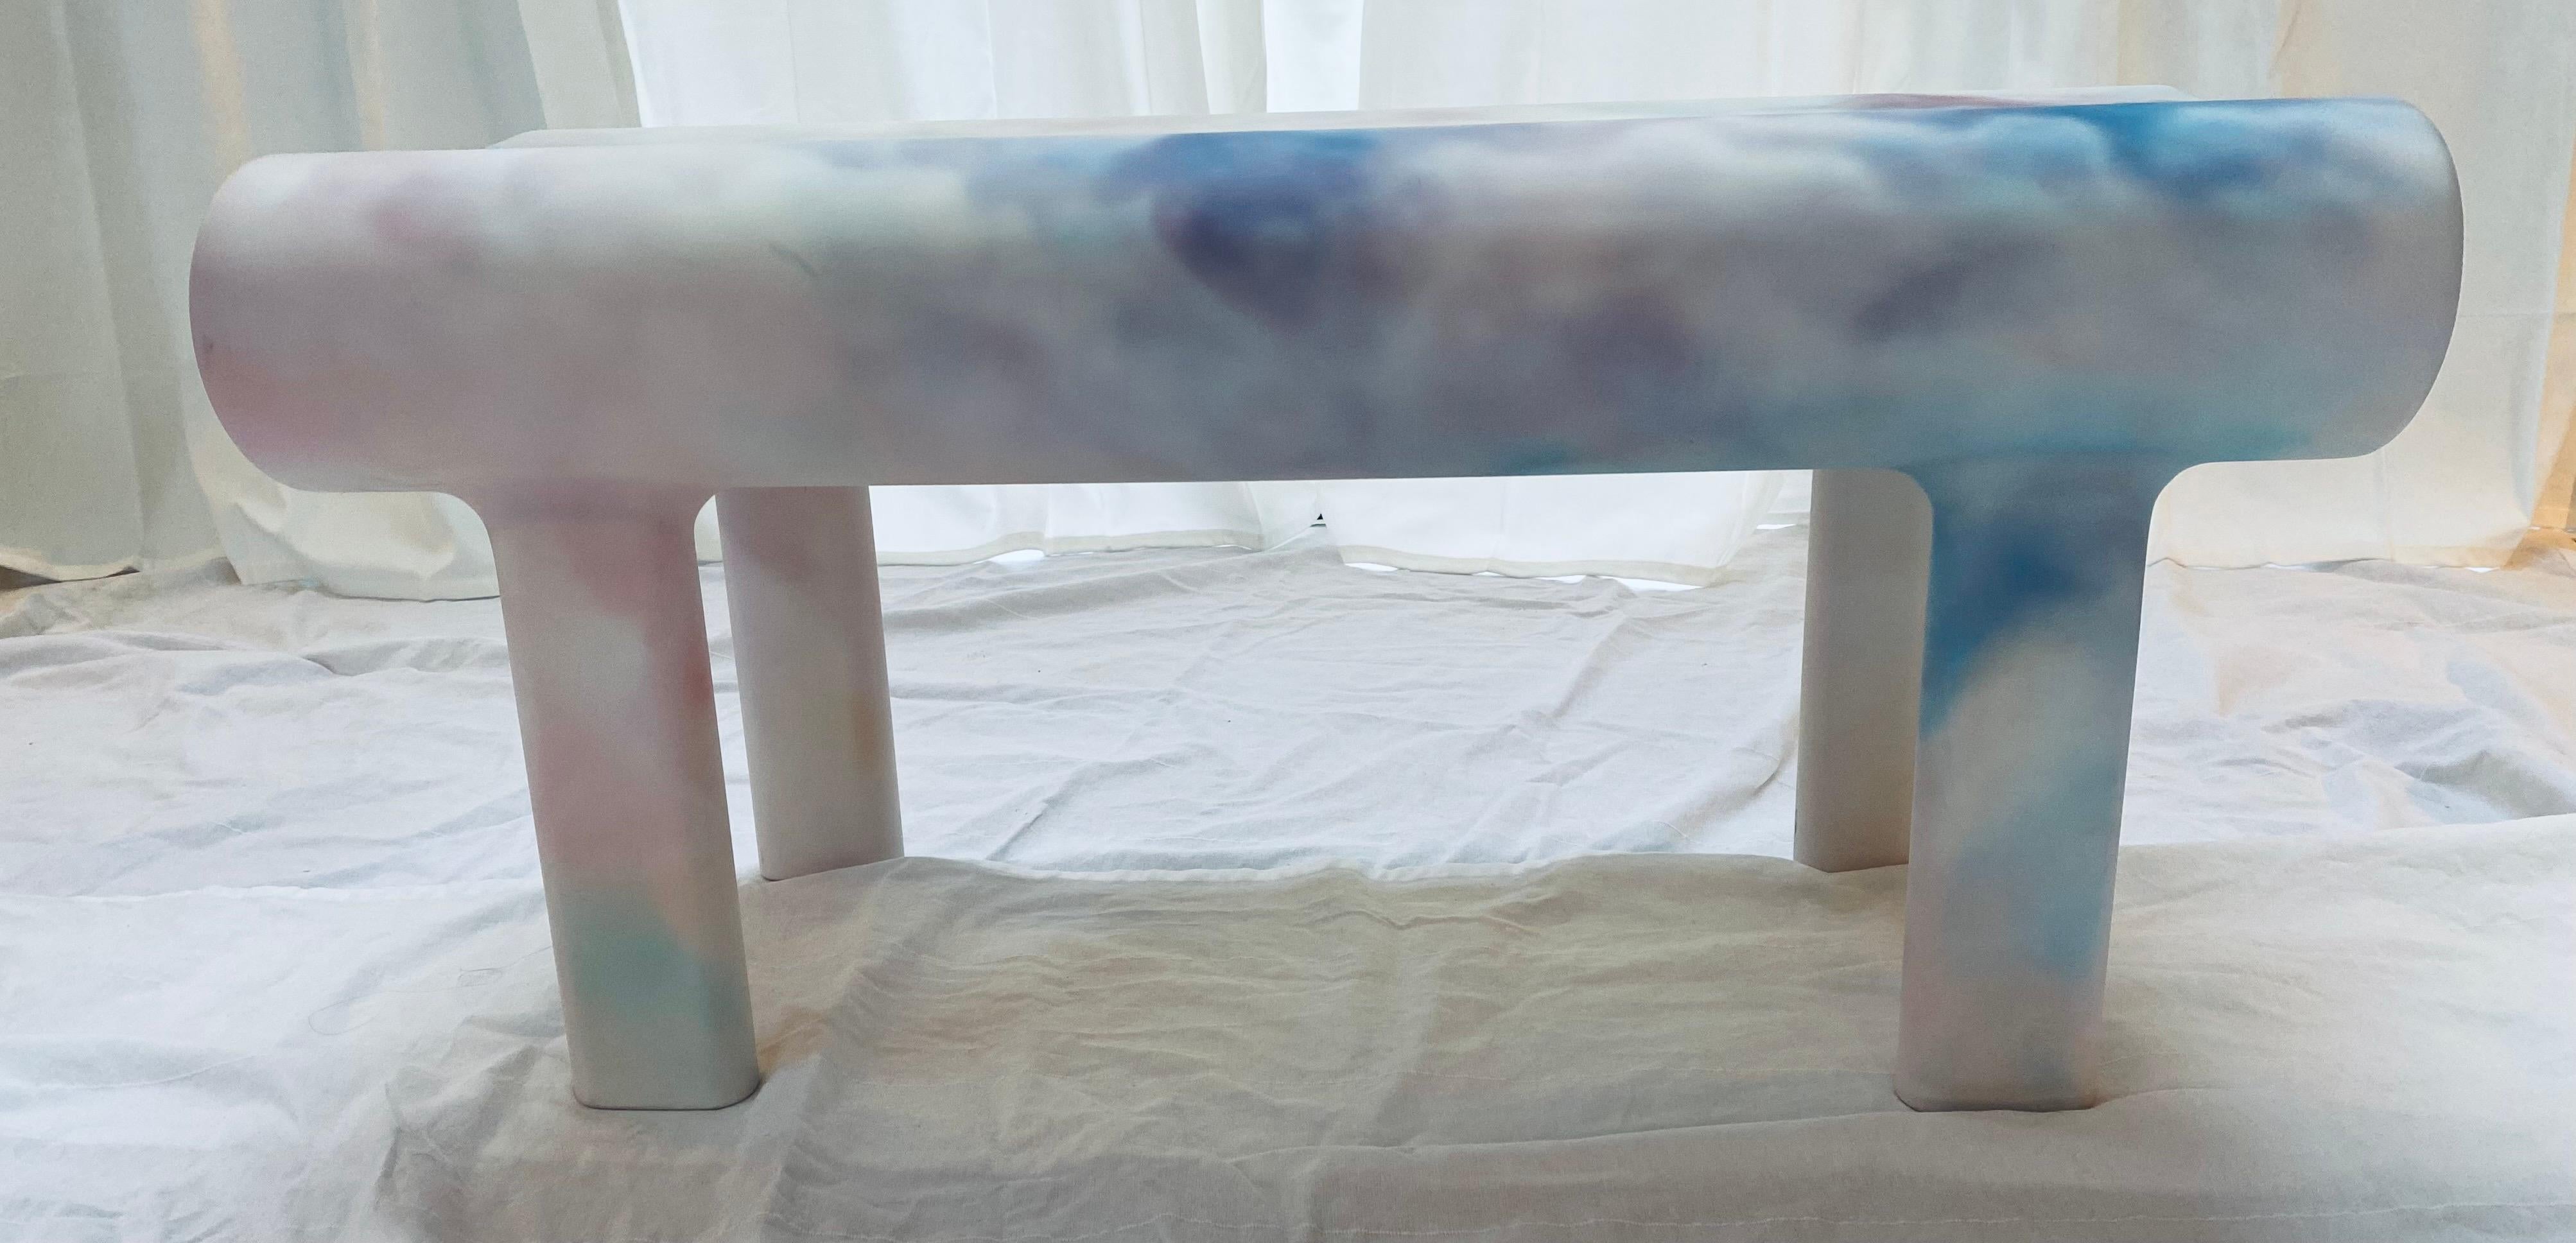 Contemporary sculpted bench from solid beech wood and coated with an indoor, outdoor matte acrylic finish. Designed by Zelonky Studios to enliven the home, office, lobbies or outdoor patio. This particular bench is entitled the Cloud.